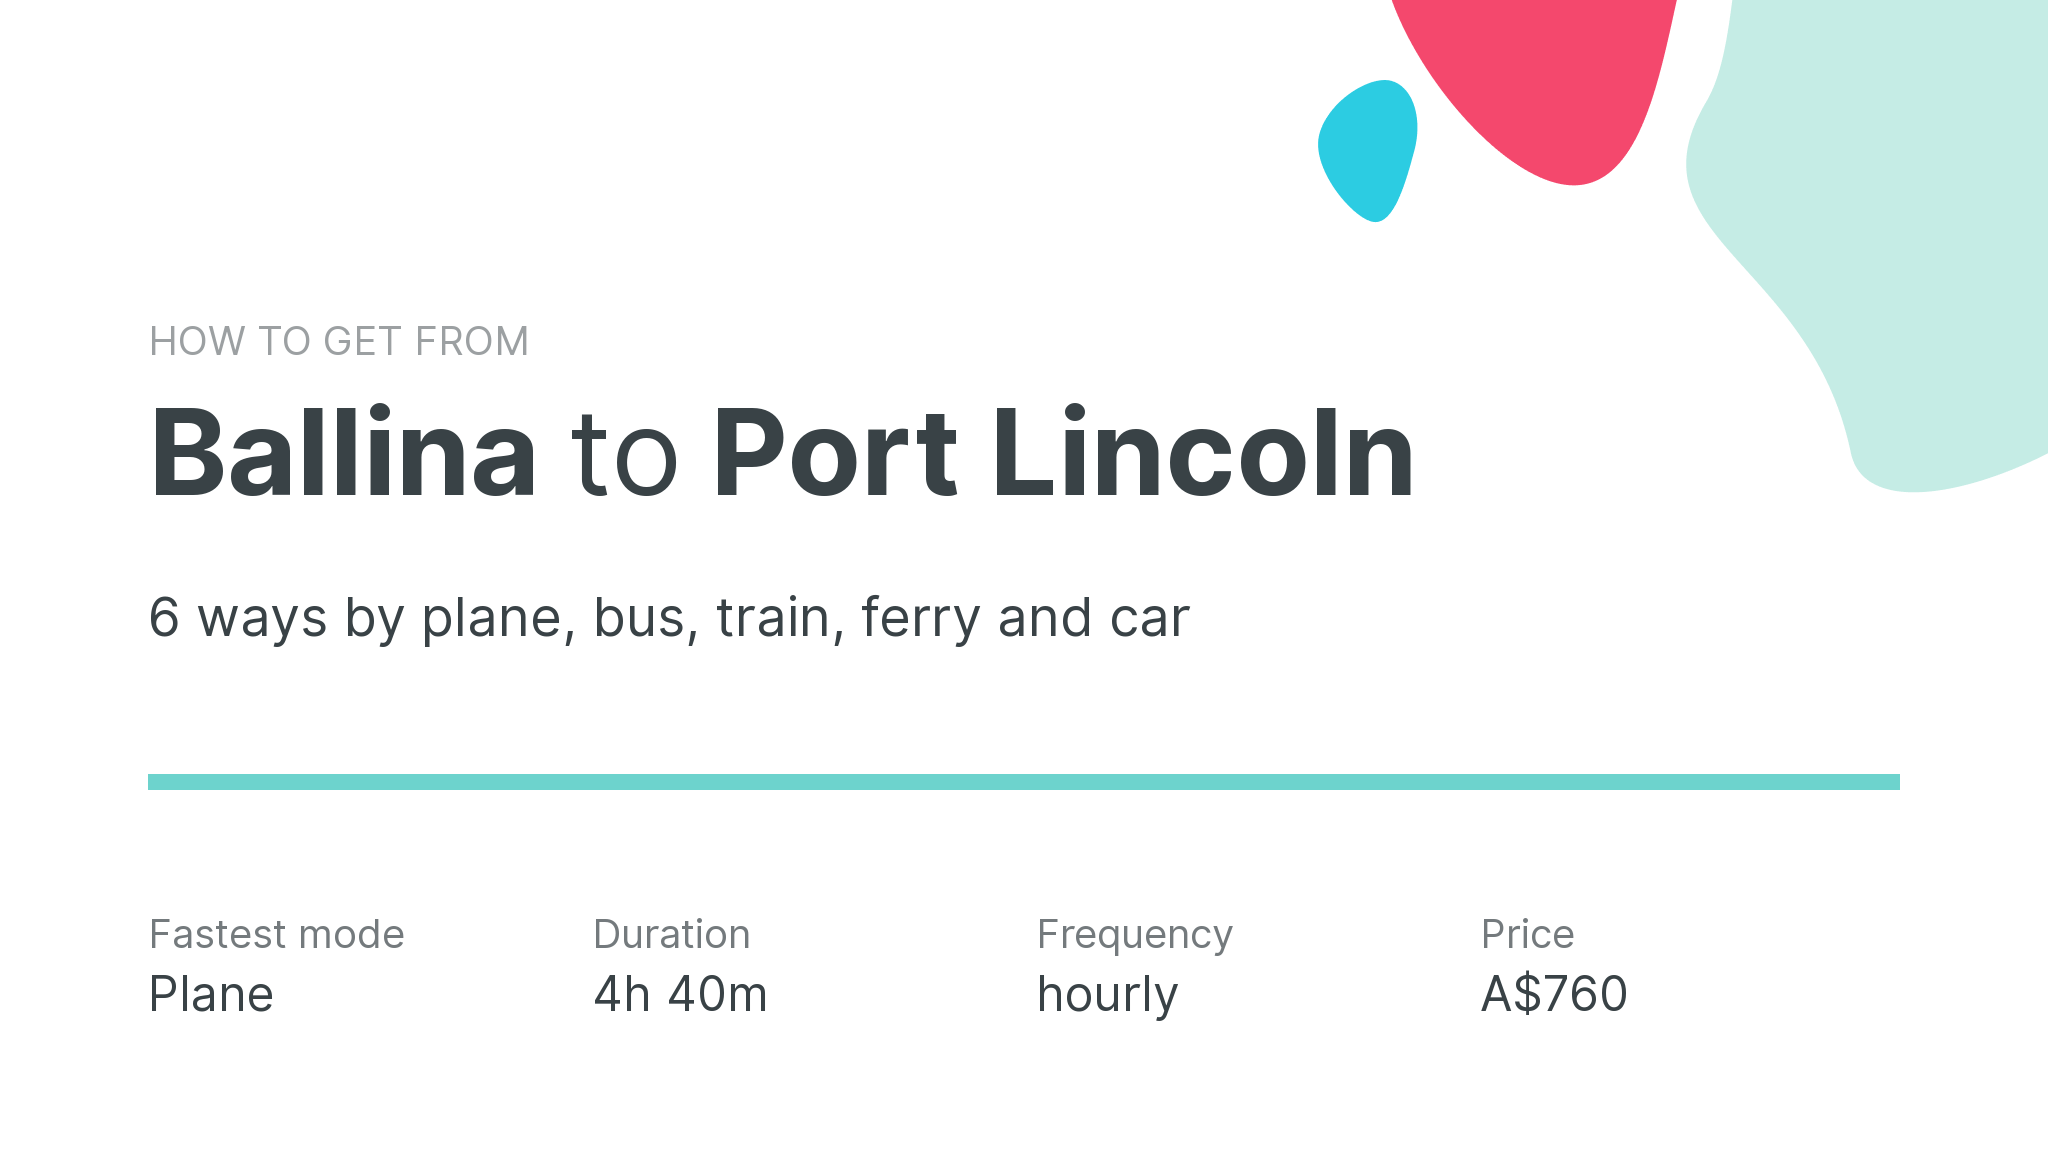 How do I get from Ballina to Port Lincoln